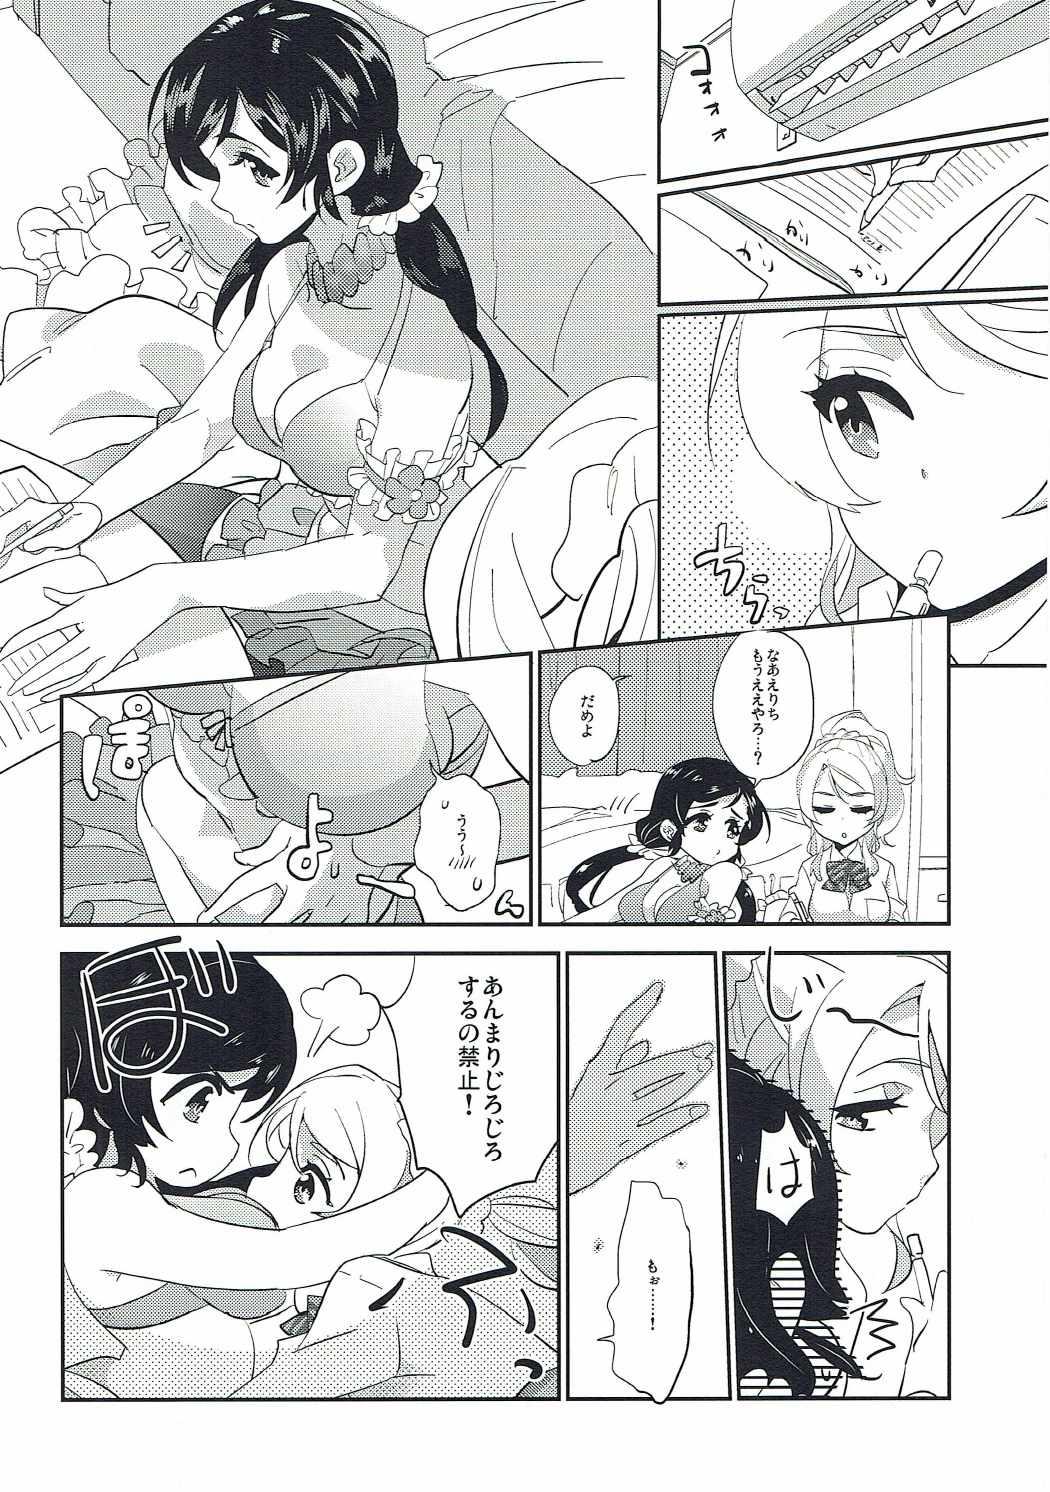 Hot Naked Women Luminous - Love live Adolescente - Page 7